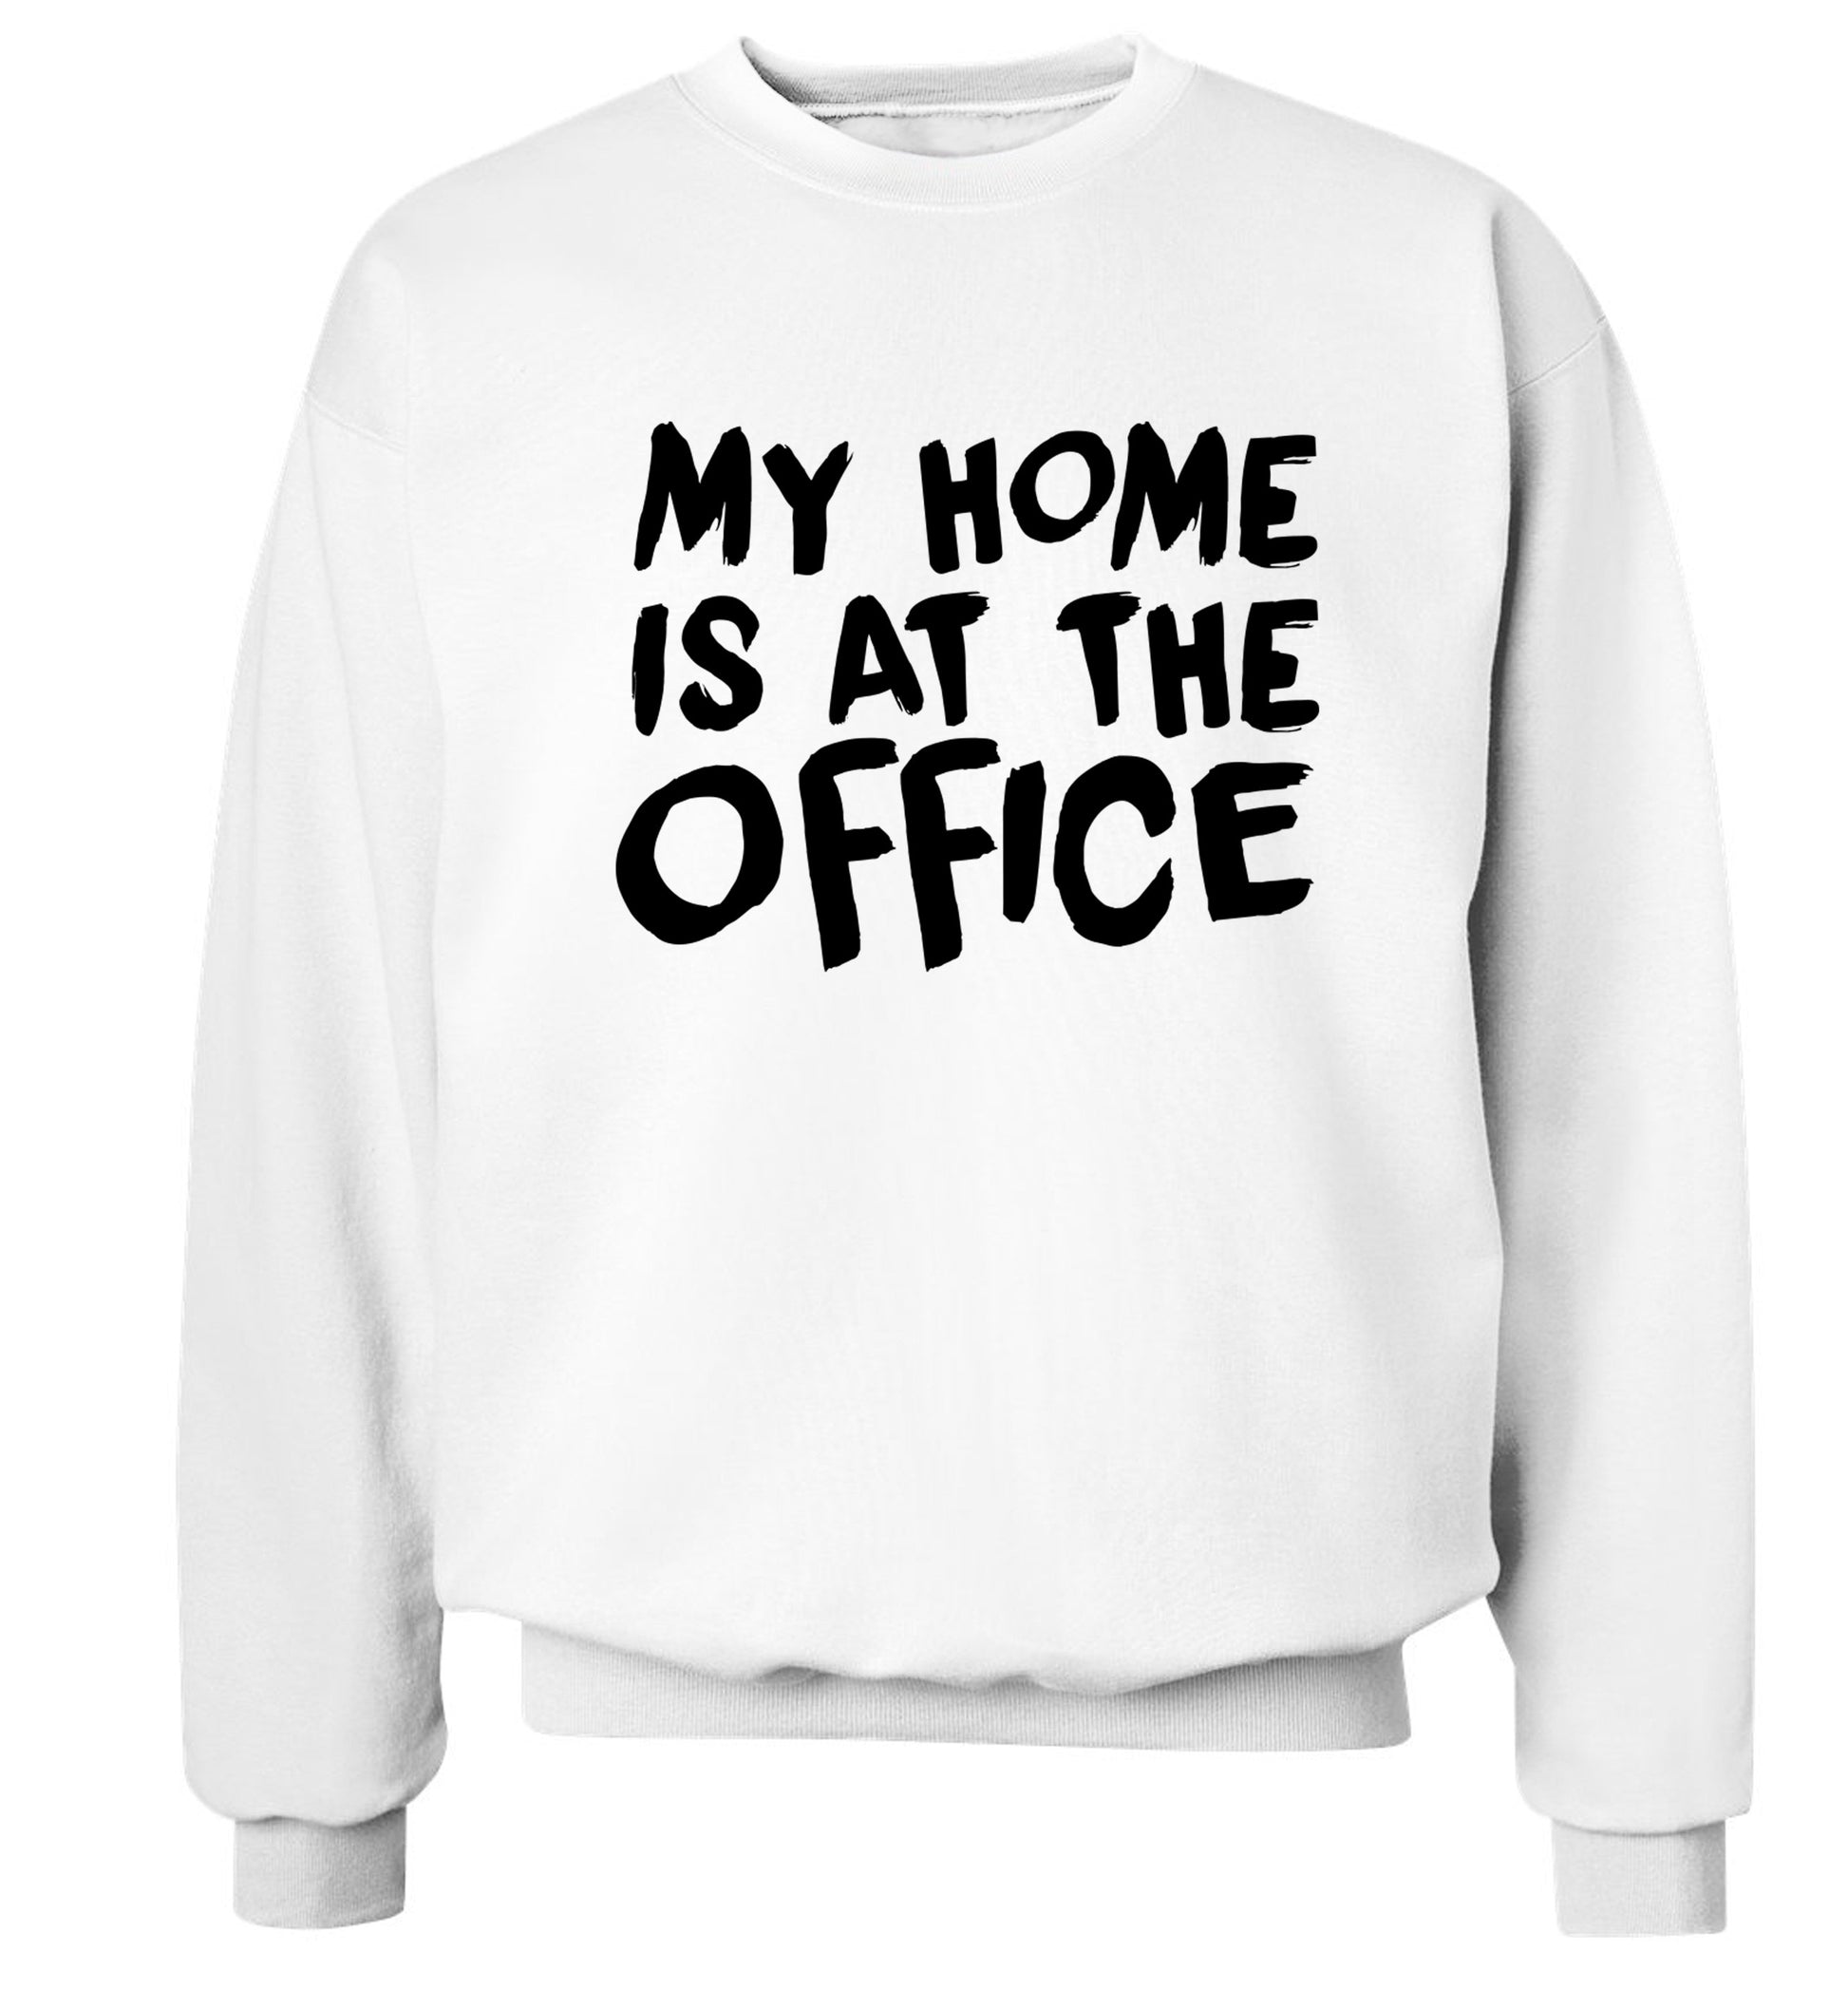 My home is at the office Adult's unisex white Sweater 2XL